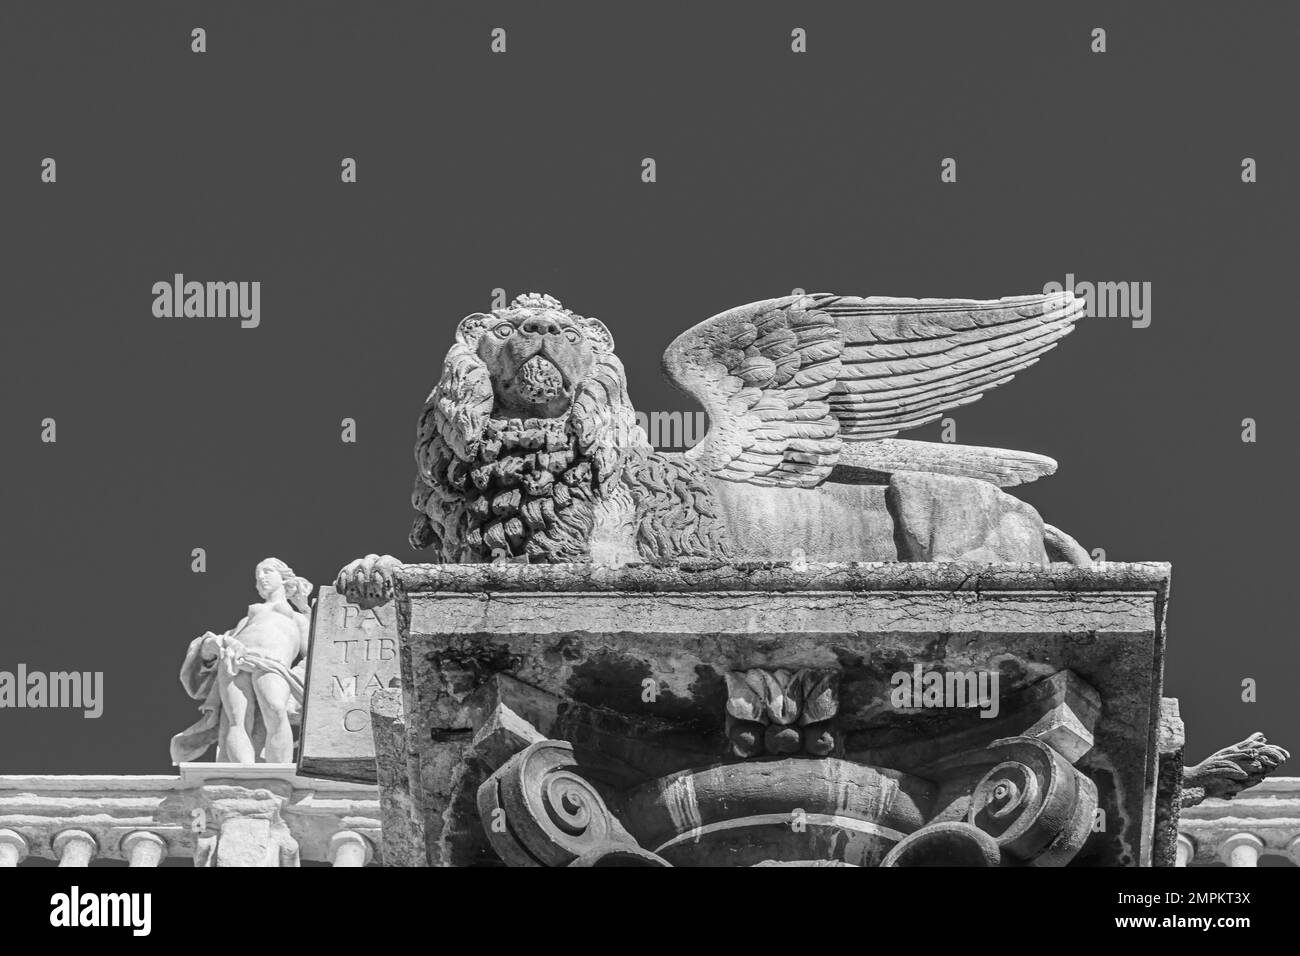 the statue of the Winged lion of St Mark, Maffei palace of baroque architecture, built in 1668  - Verona, Veneto region - northern Italy - Europe Stock Photo